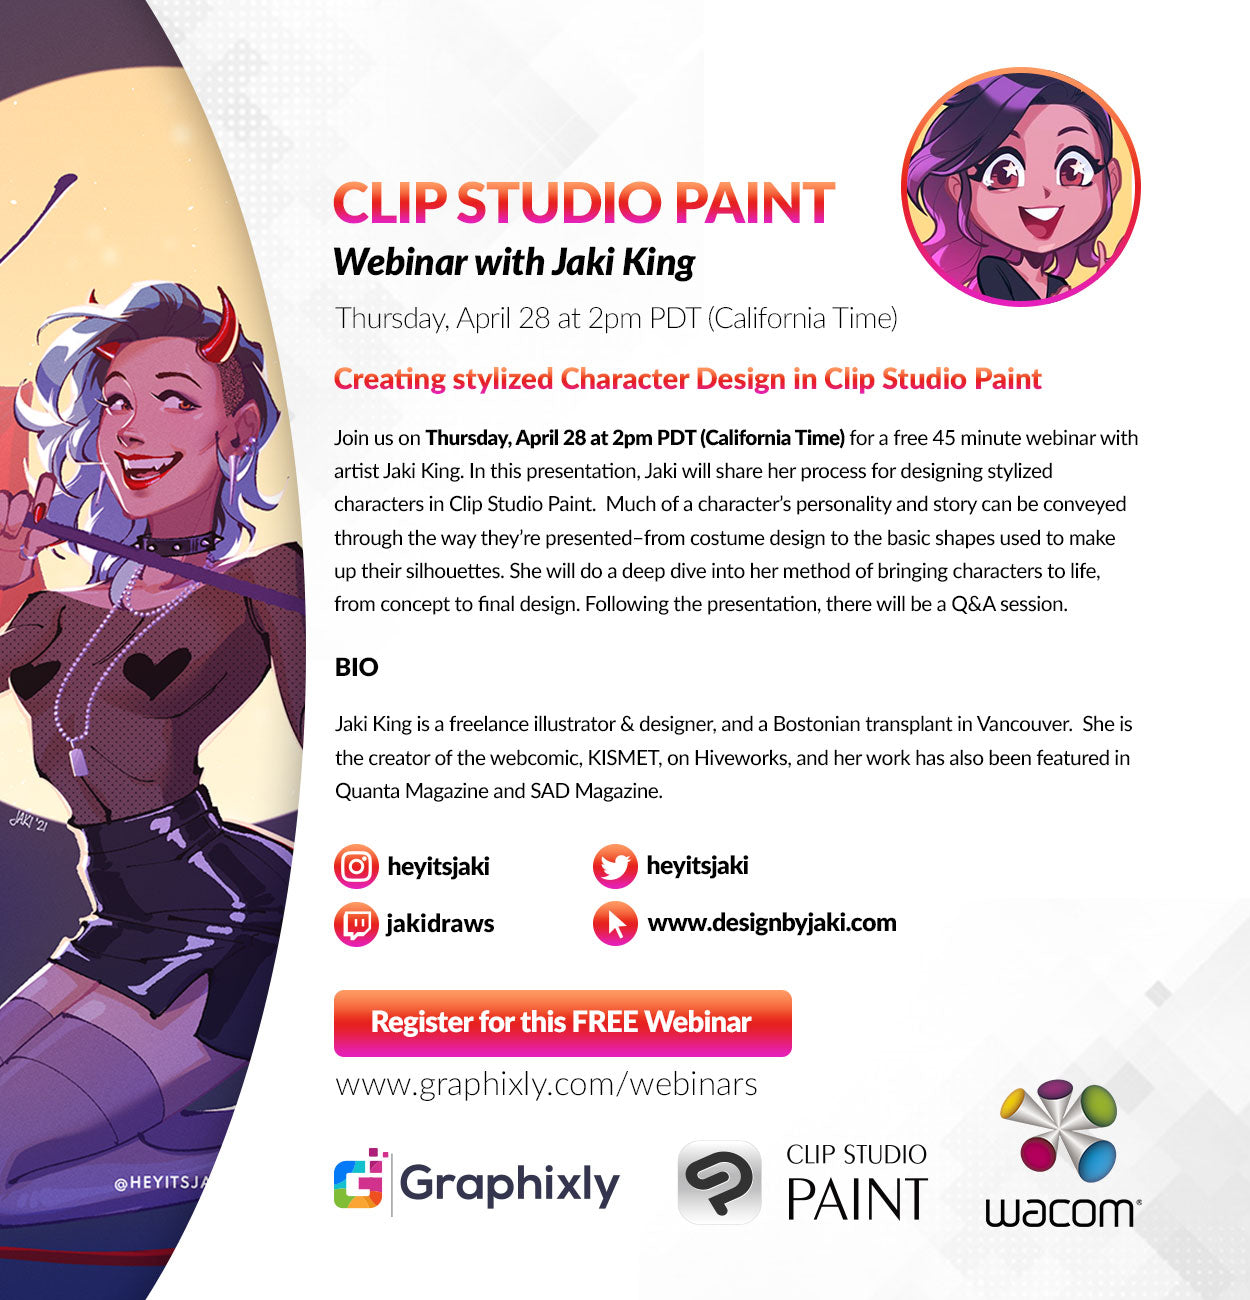 Webinar – Creating stylized Character Design in Clip Studio Paint with Jaki King